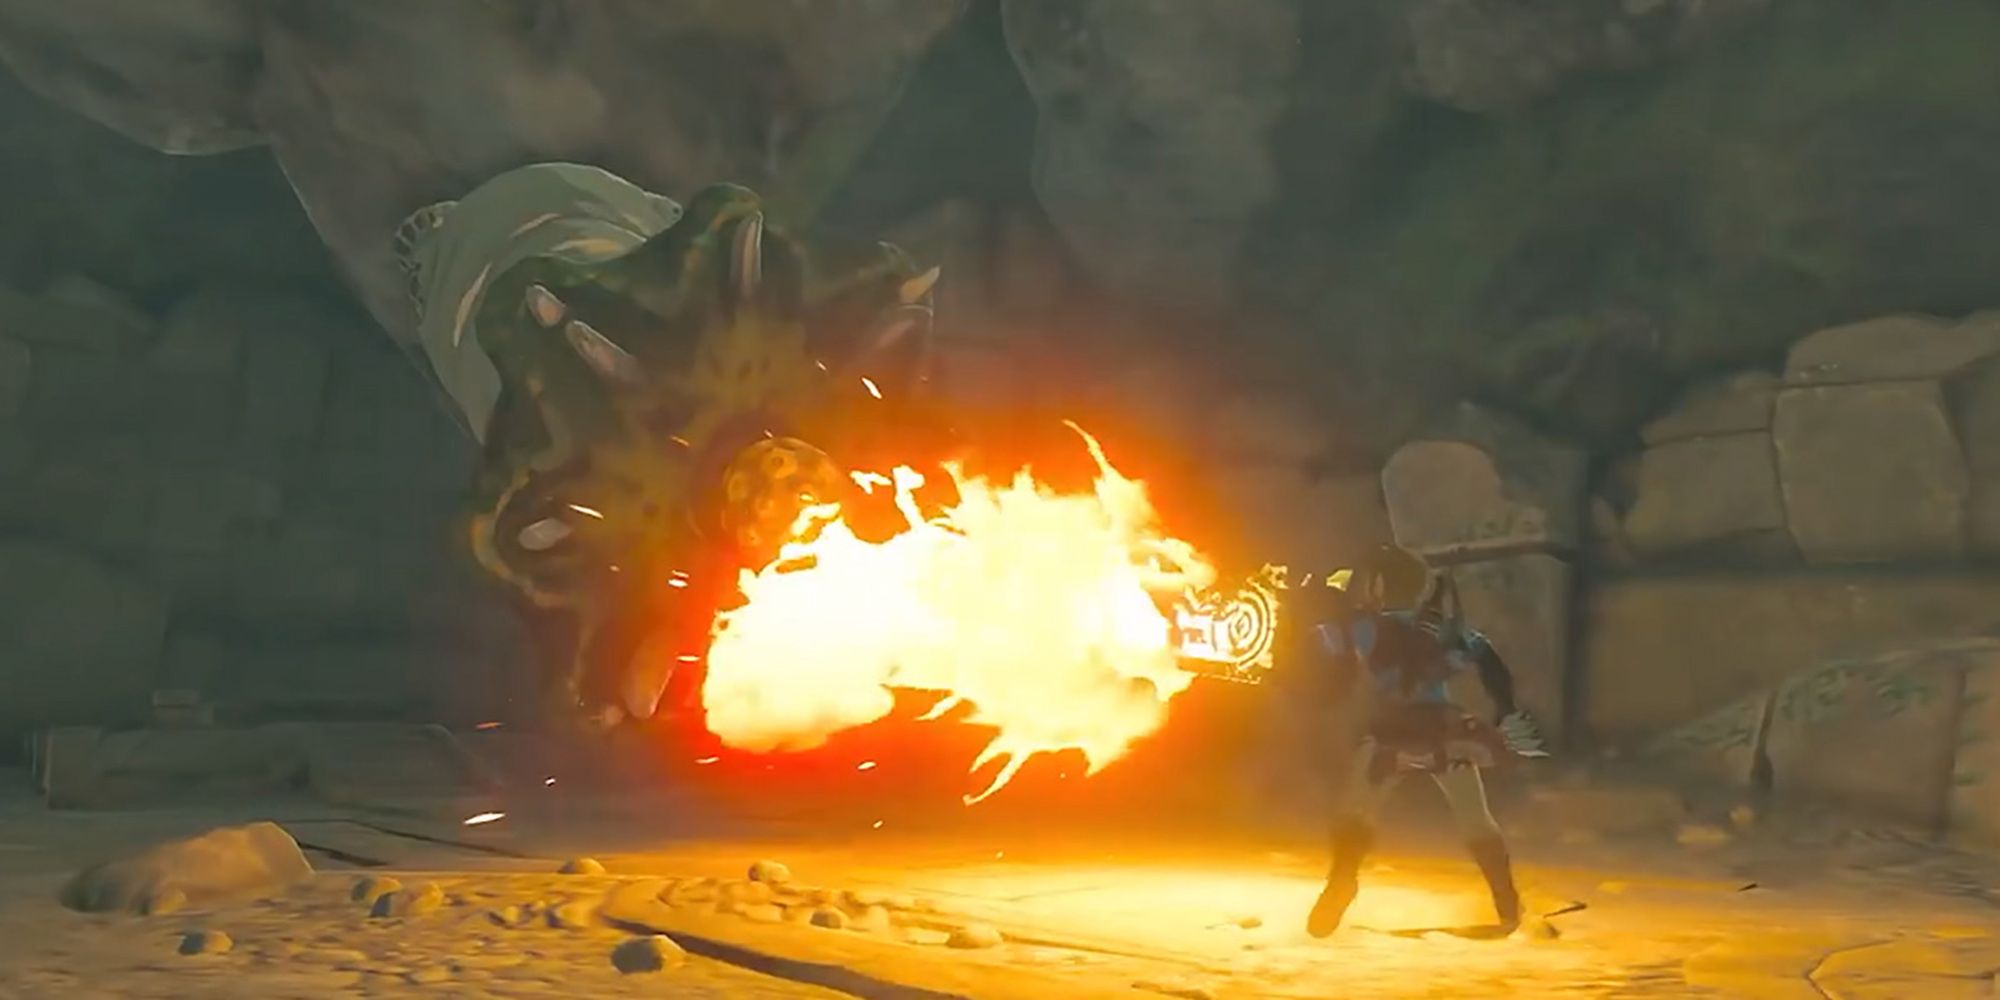 Legend-Of-Zelda-Breath-Of-The-Wild-2-Second-Trailer---Links-New-Flamethrower-Weapon-Or-Shield-1